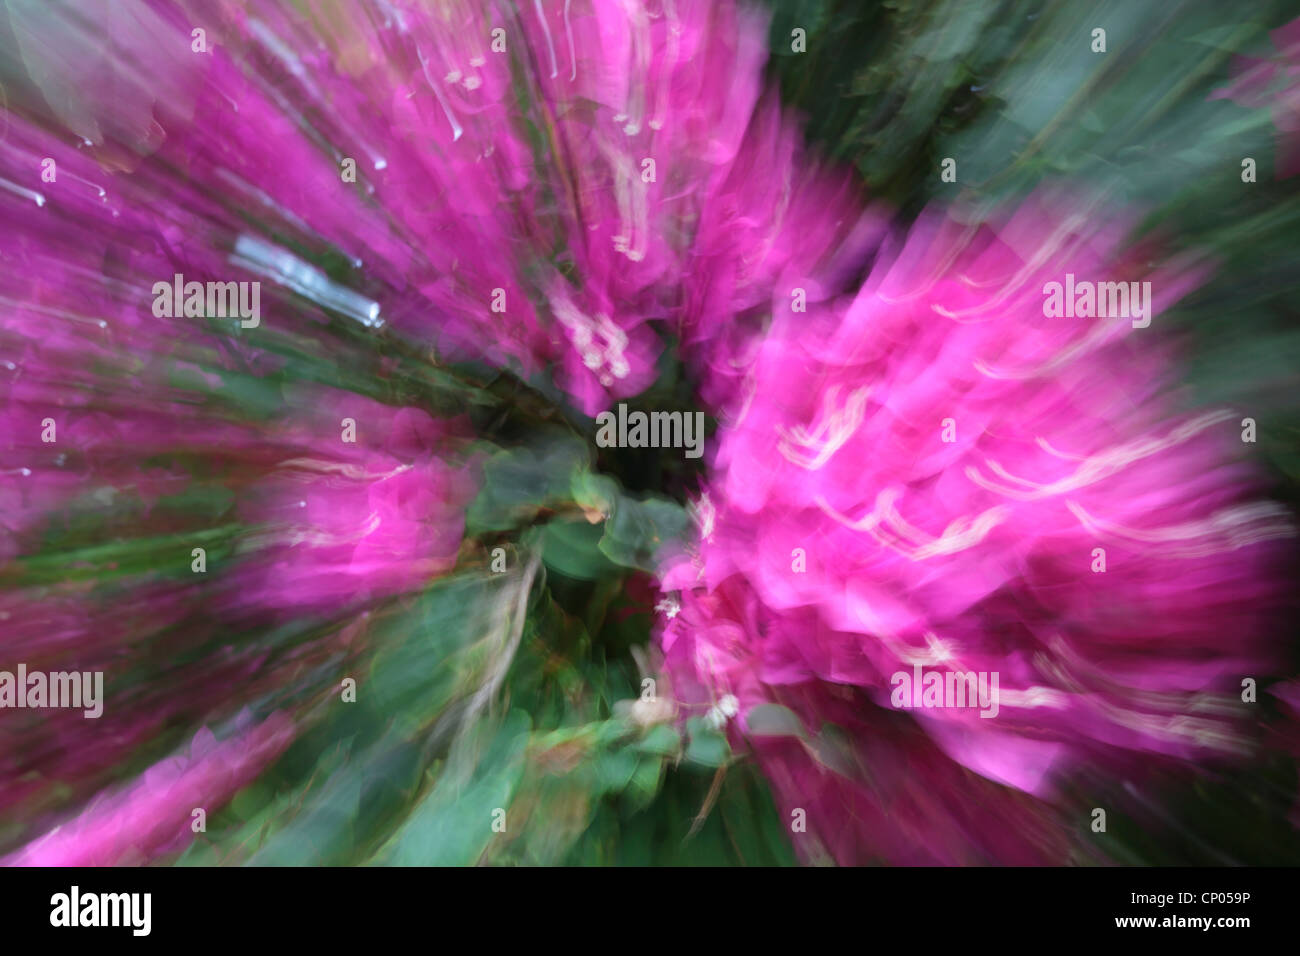 Impressionistic portrayal of pink flowers in the Seychelles Stock Photo